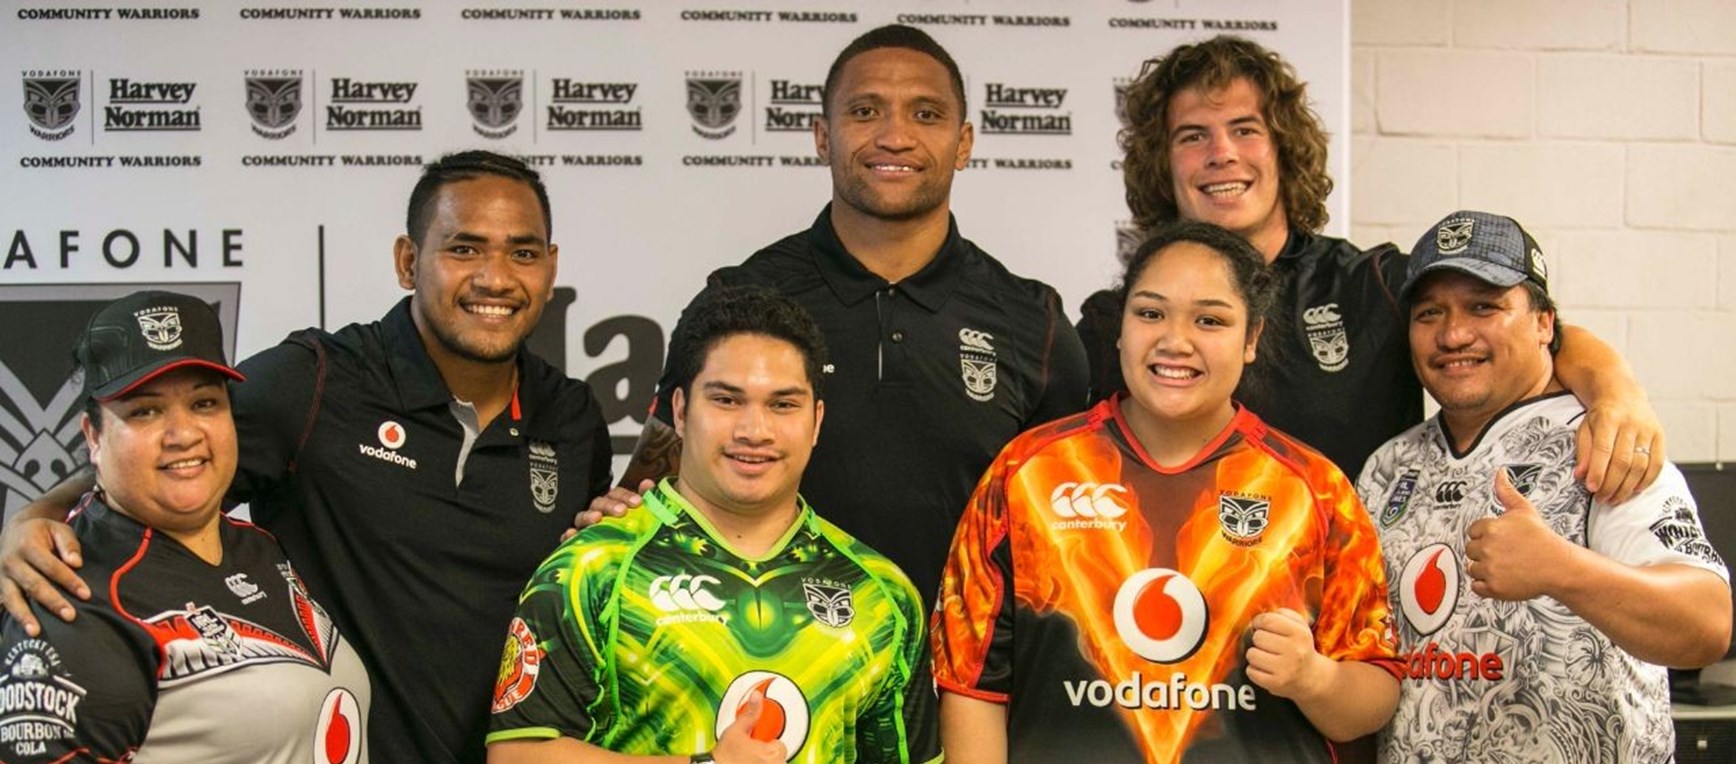 Harvey Norman Manukau visit in pictures